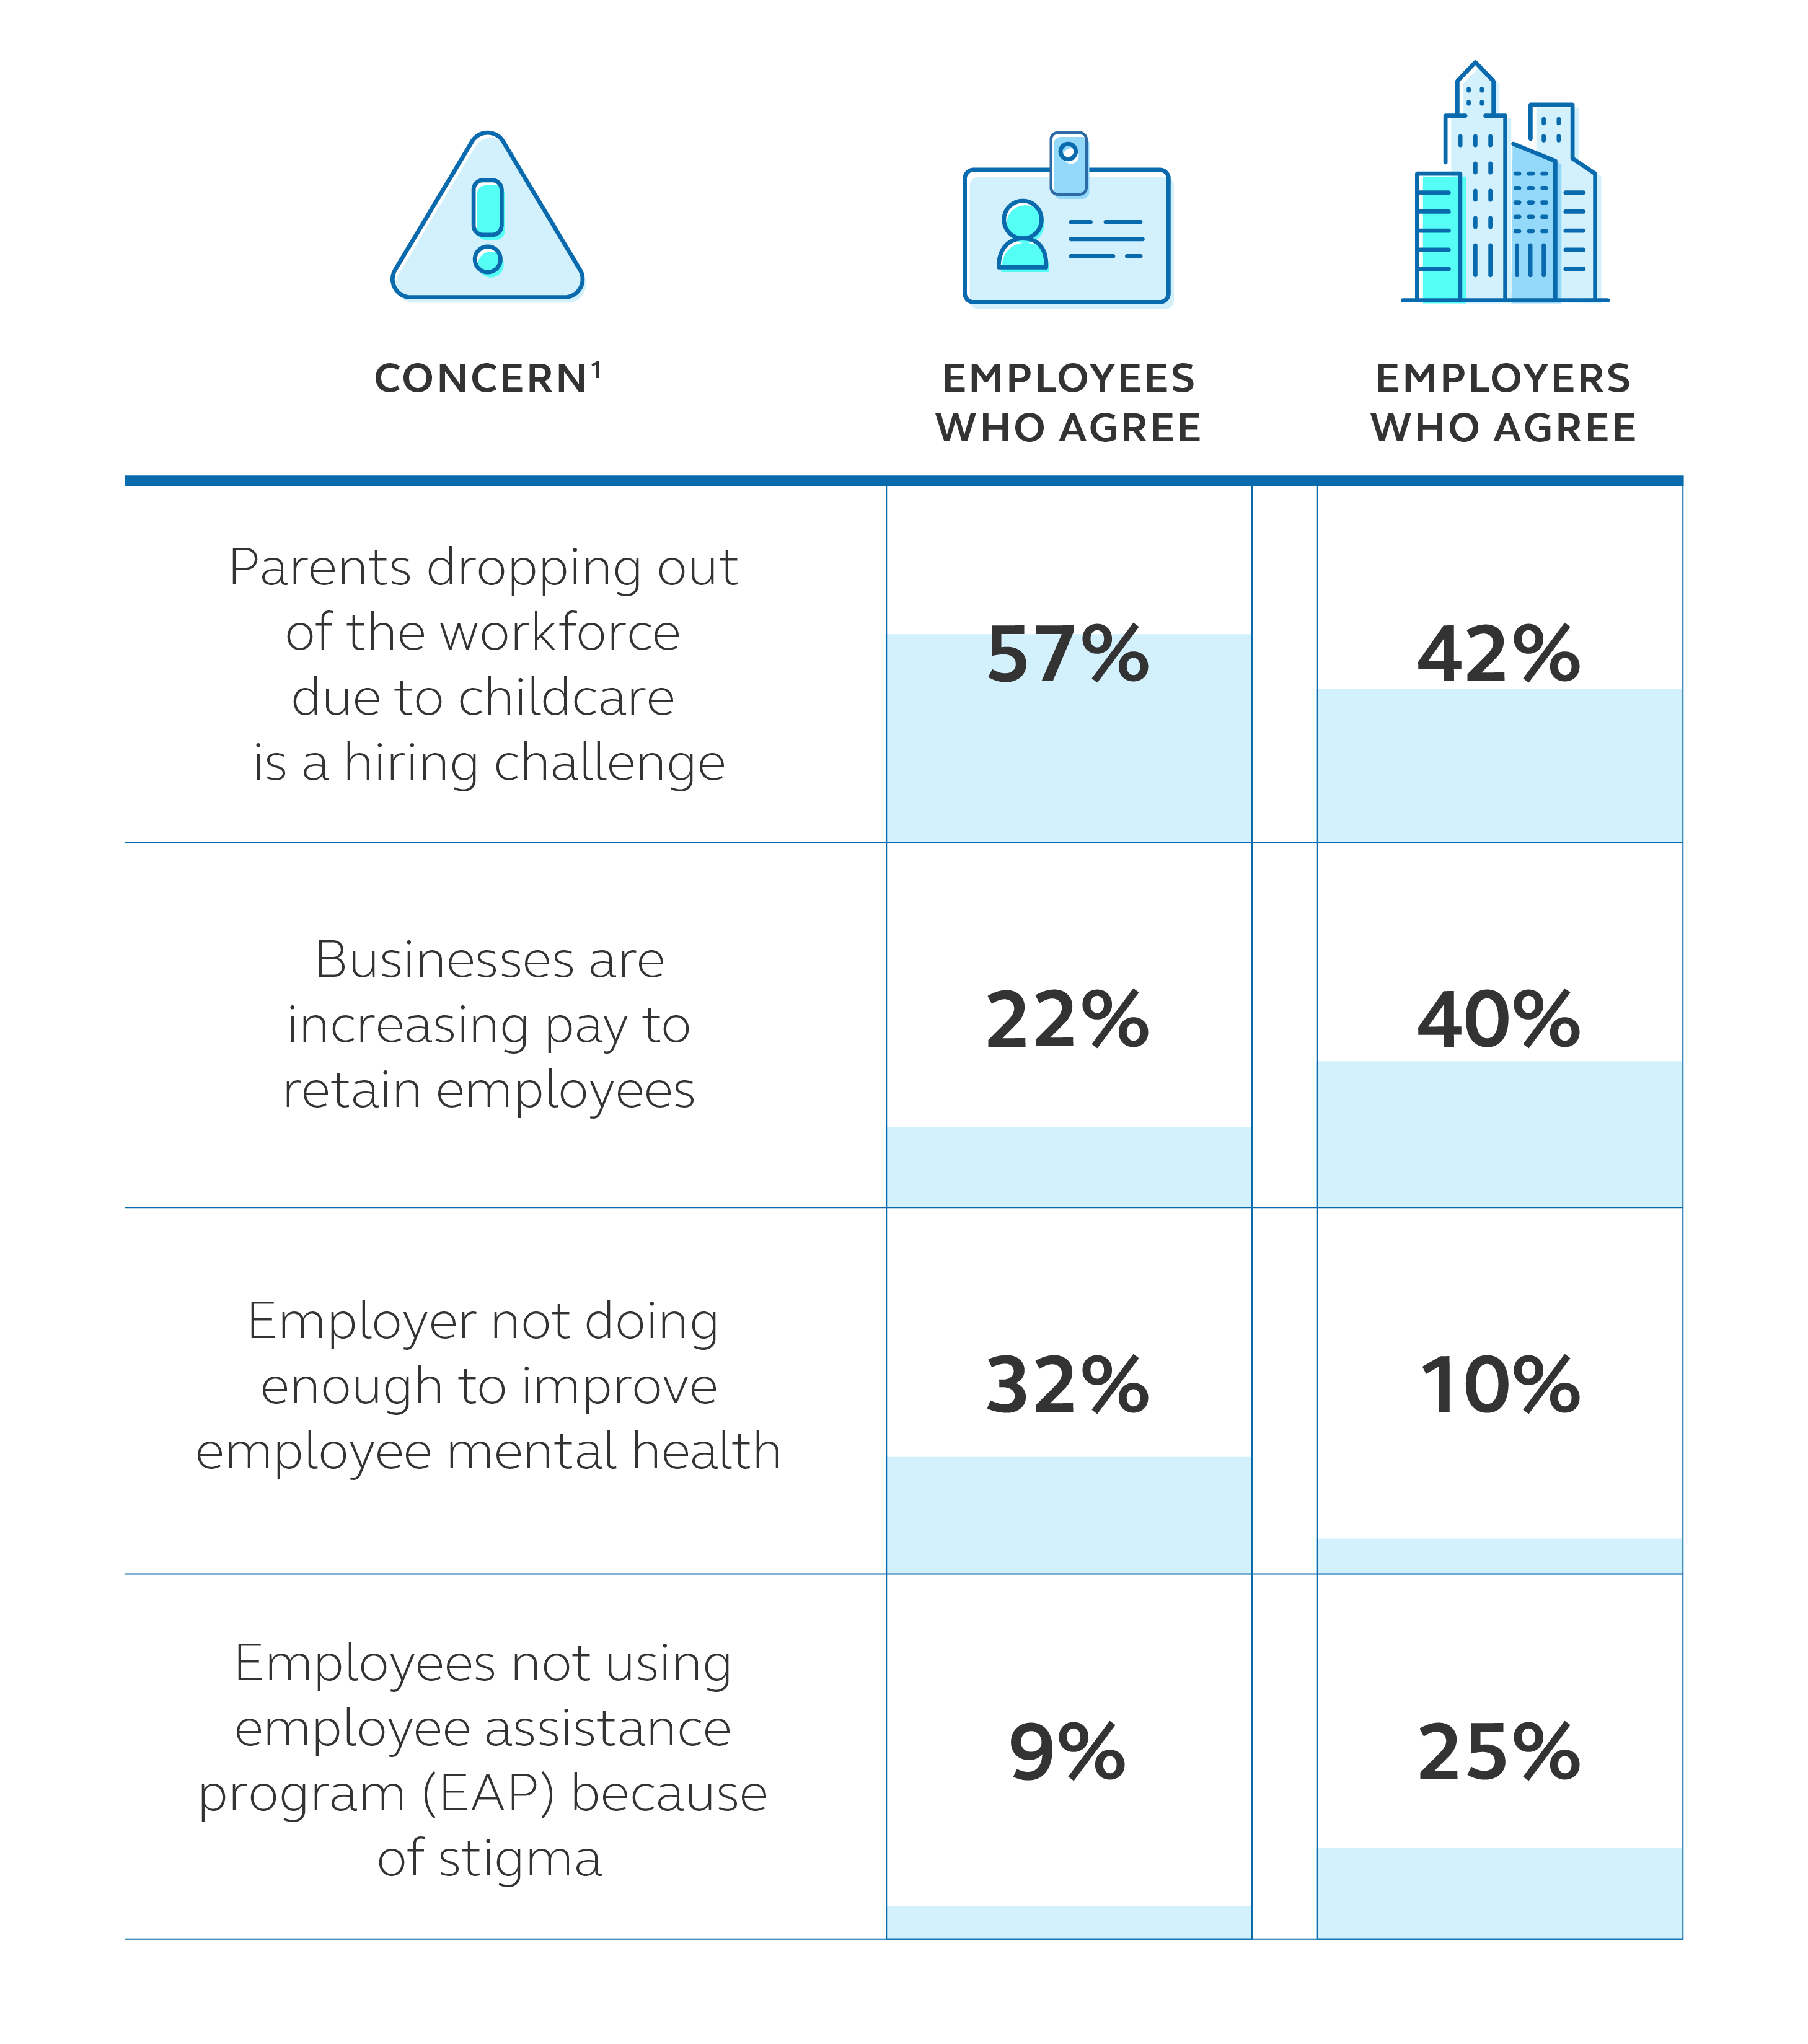 Table showing employee concerns